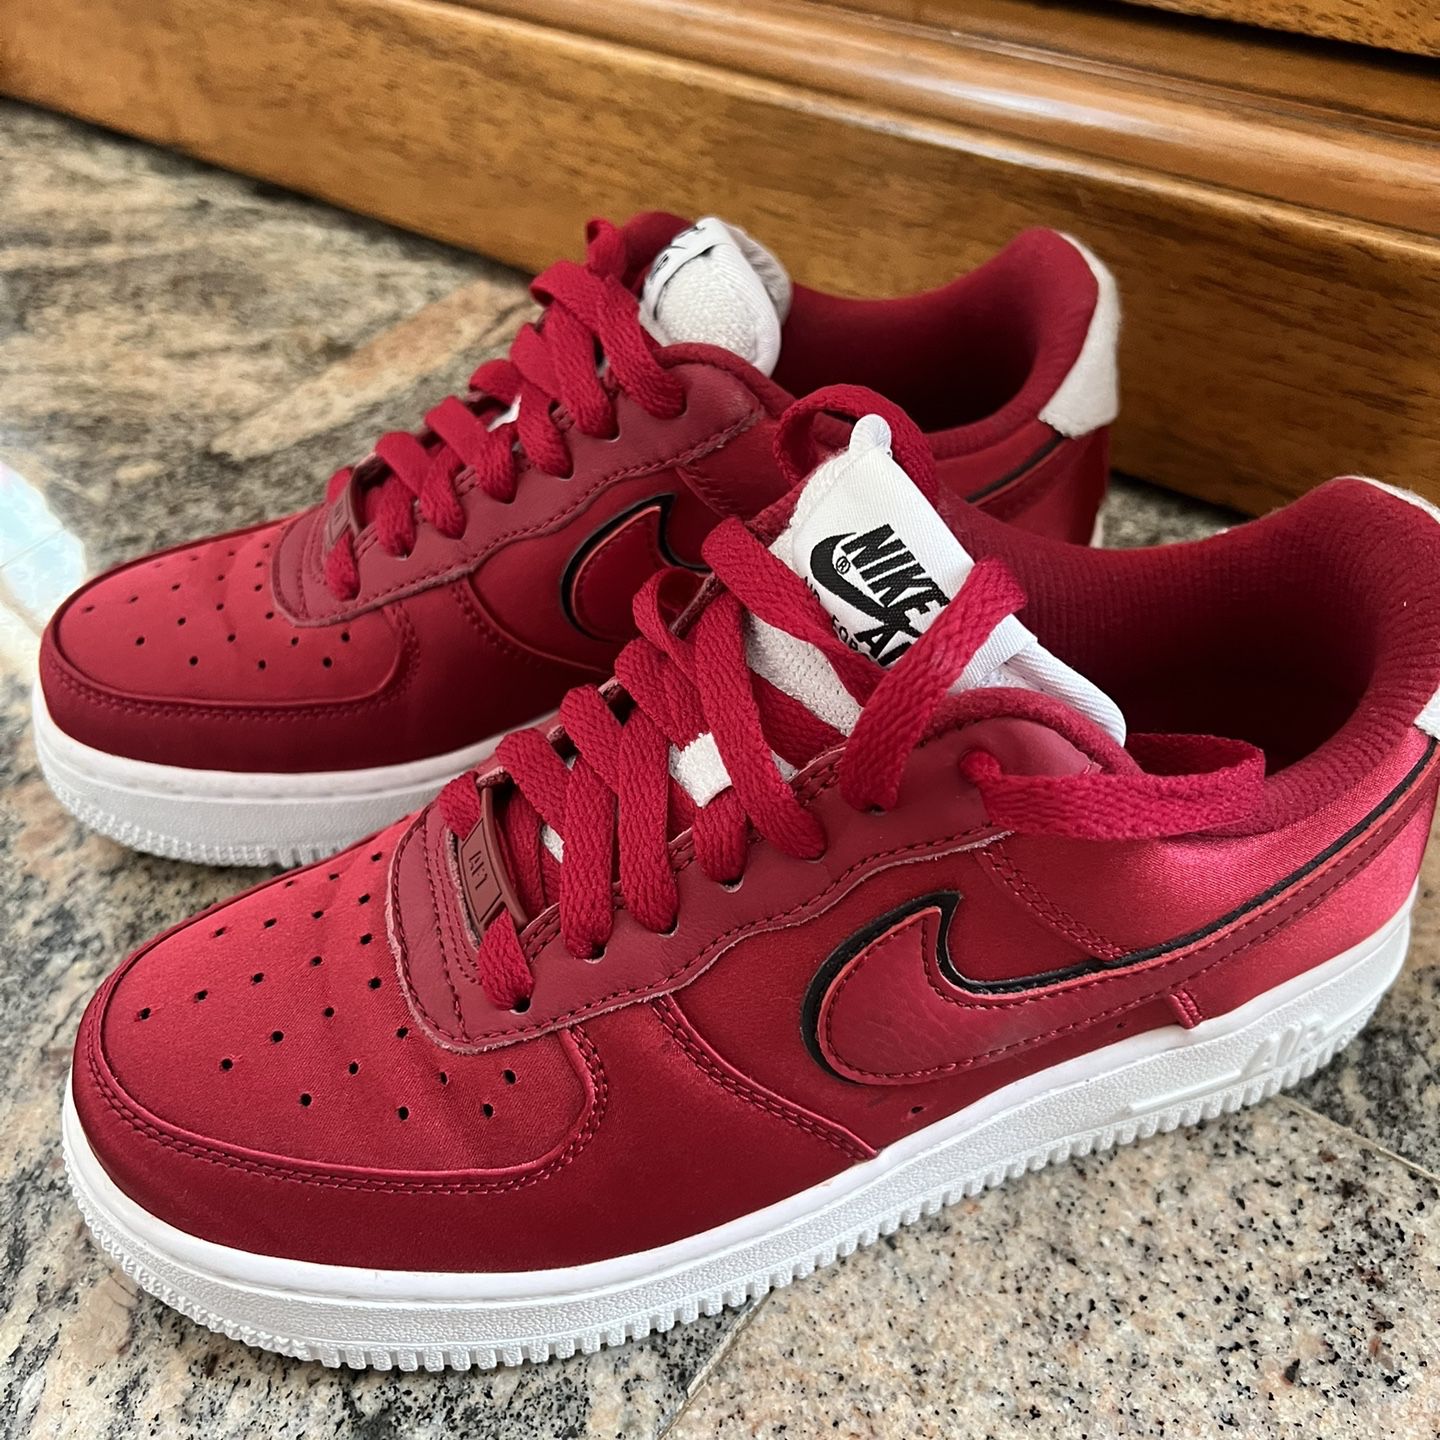 Woman's Nike Air Force 1's